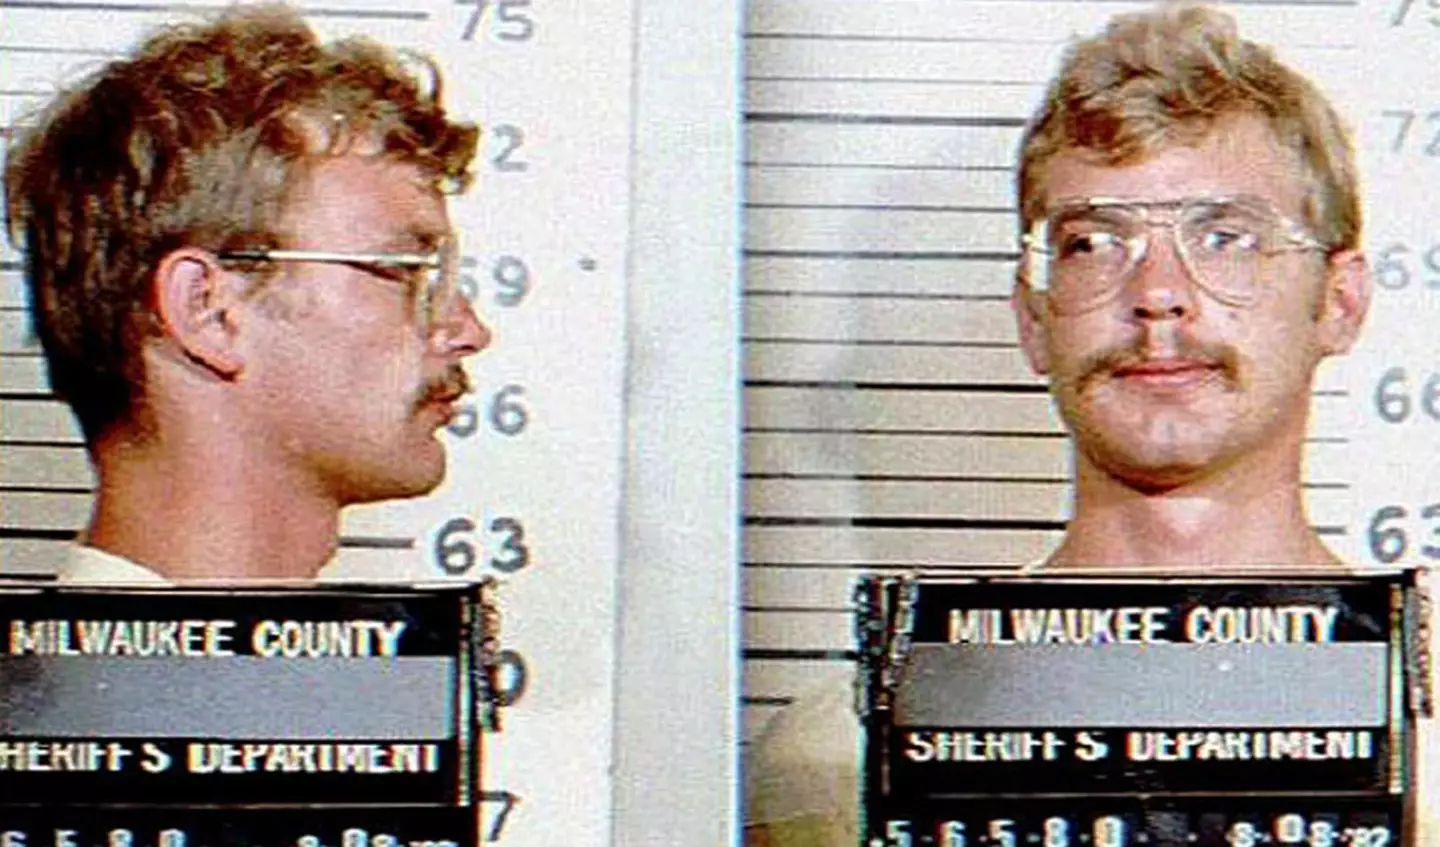 Jeffrey Dahmer is one of the serial killers on the list.